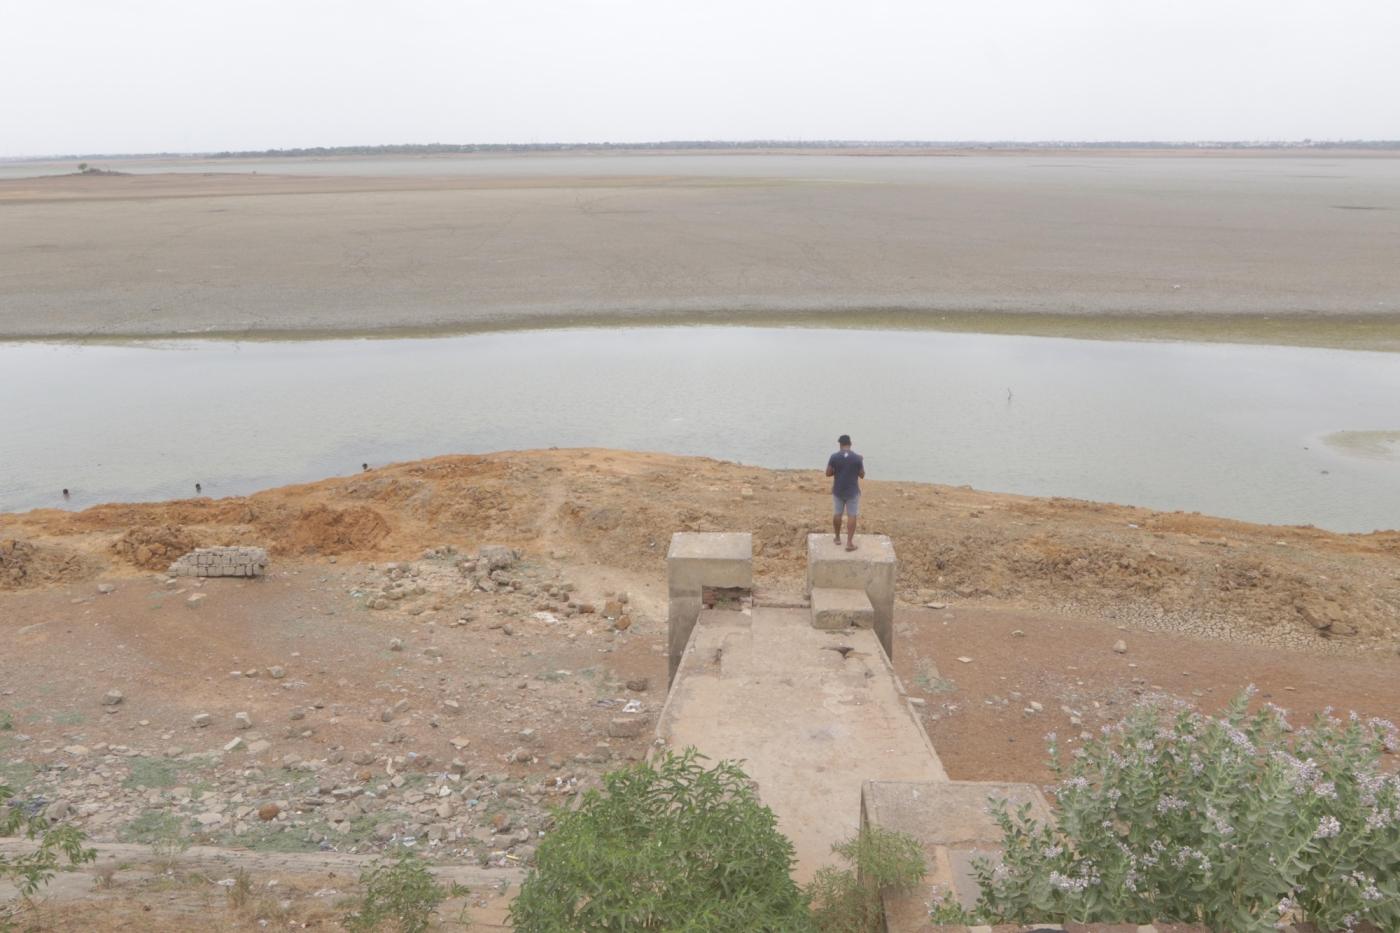 Chennai: A view of the dried out Puzhal reservoir on the outskirts of Chennai, on June 20, 2019. Chennai and several other places in Tamil Nadu are suffering from water shortage. The ground water levels too have gone down owing to lack of rains. (Photo: IANS) by .